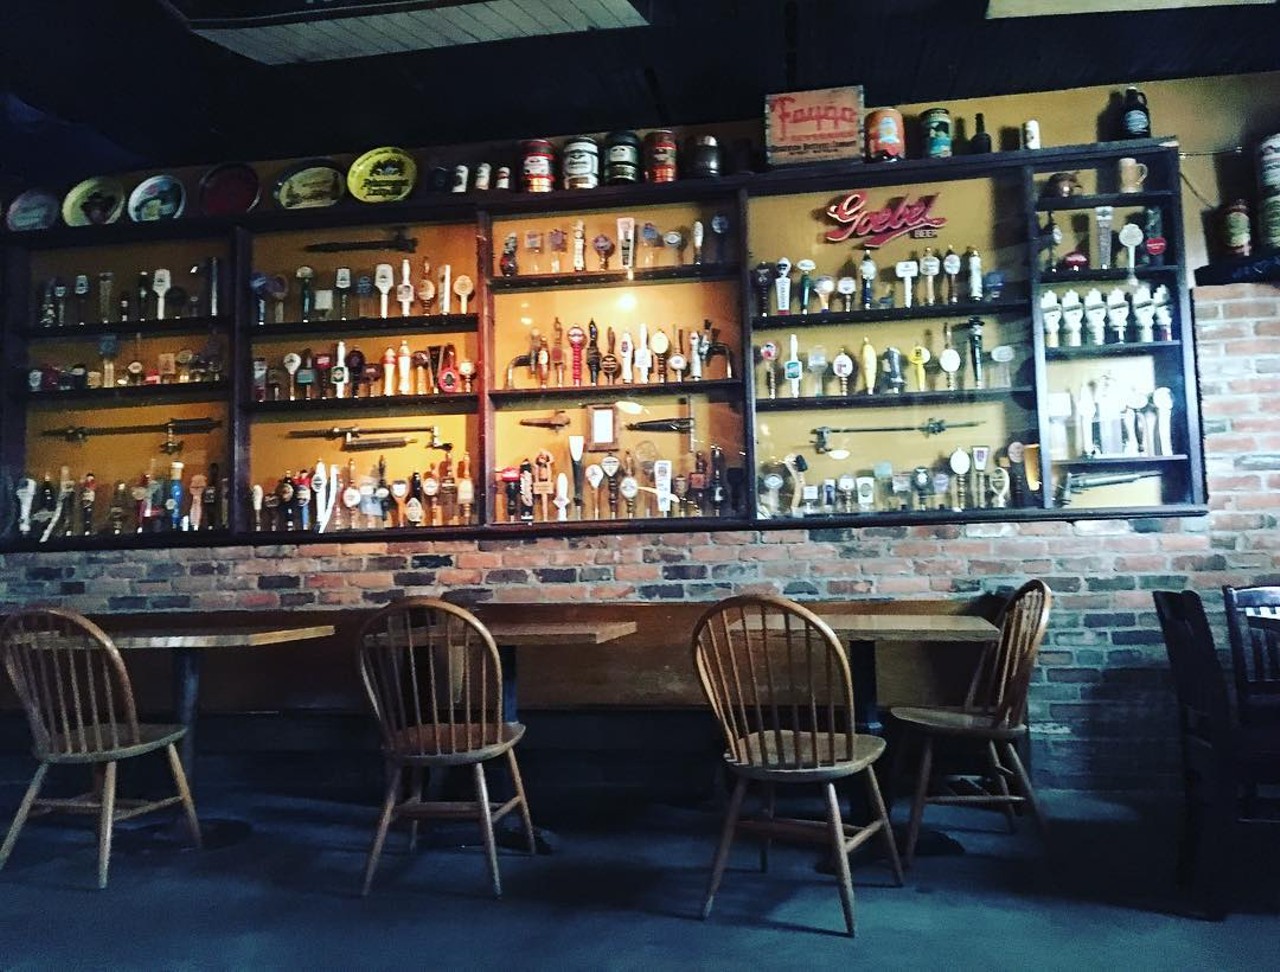 Ye Olde Tap Room
14915 Charlevoix St, Detroit
(313)-824-1030
As one of Detroit&#146;s oldest bars (we&#146;re talking pre-prohibition) the whiskey list is long, and the beer list is even longer. Escape CNN and Fox News and learn a little history at this neighborhood bar.
Photo via IG user @mille319